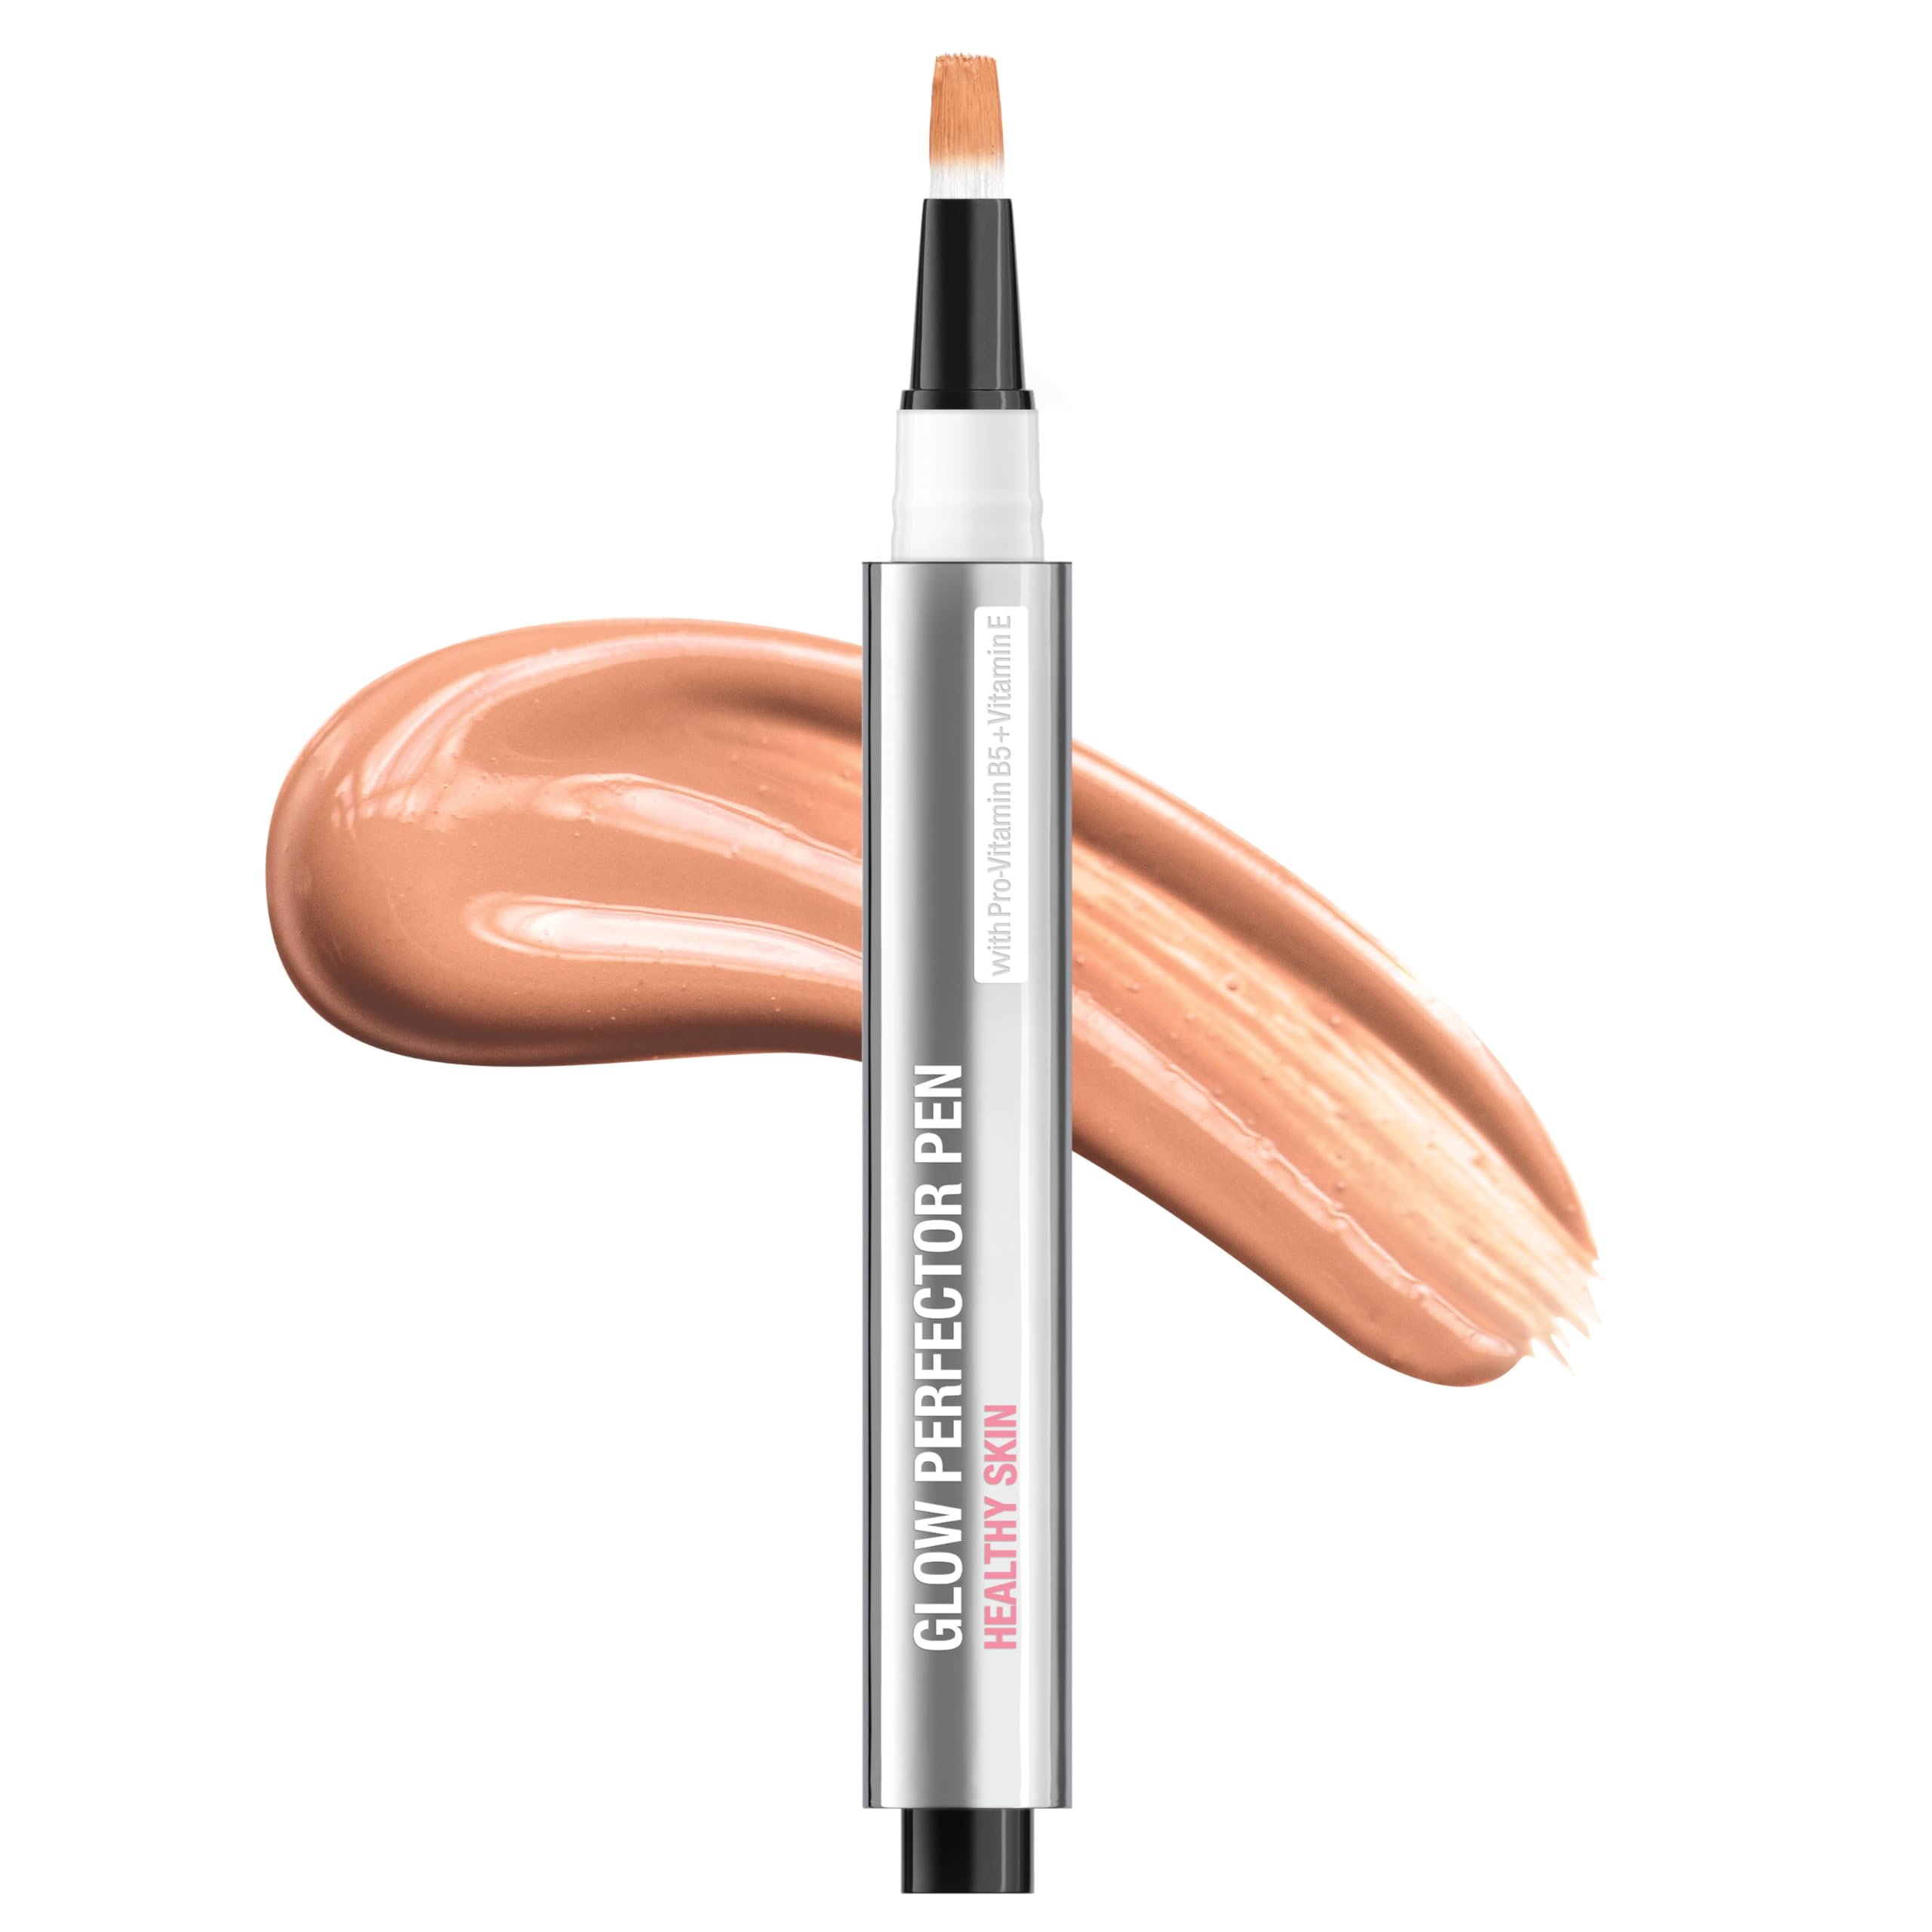 Neutrogena Healthy Skin Glow Perfector Pen, Lightweight Brightening Concealer Pen with Pro-Vitamin B5 & Vitamin E to Brighten Darkness & Dullness for a Natural, Radiant Highlight, Neutral, 1 o